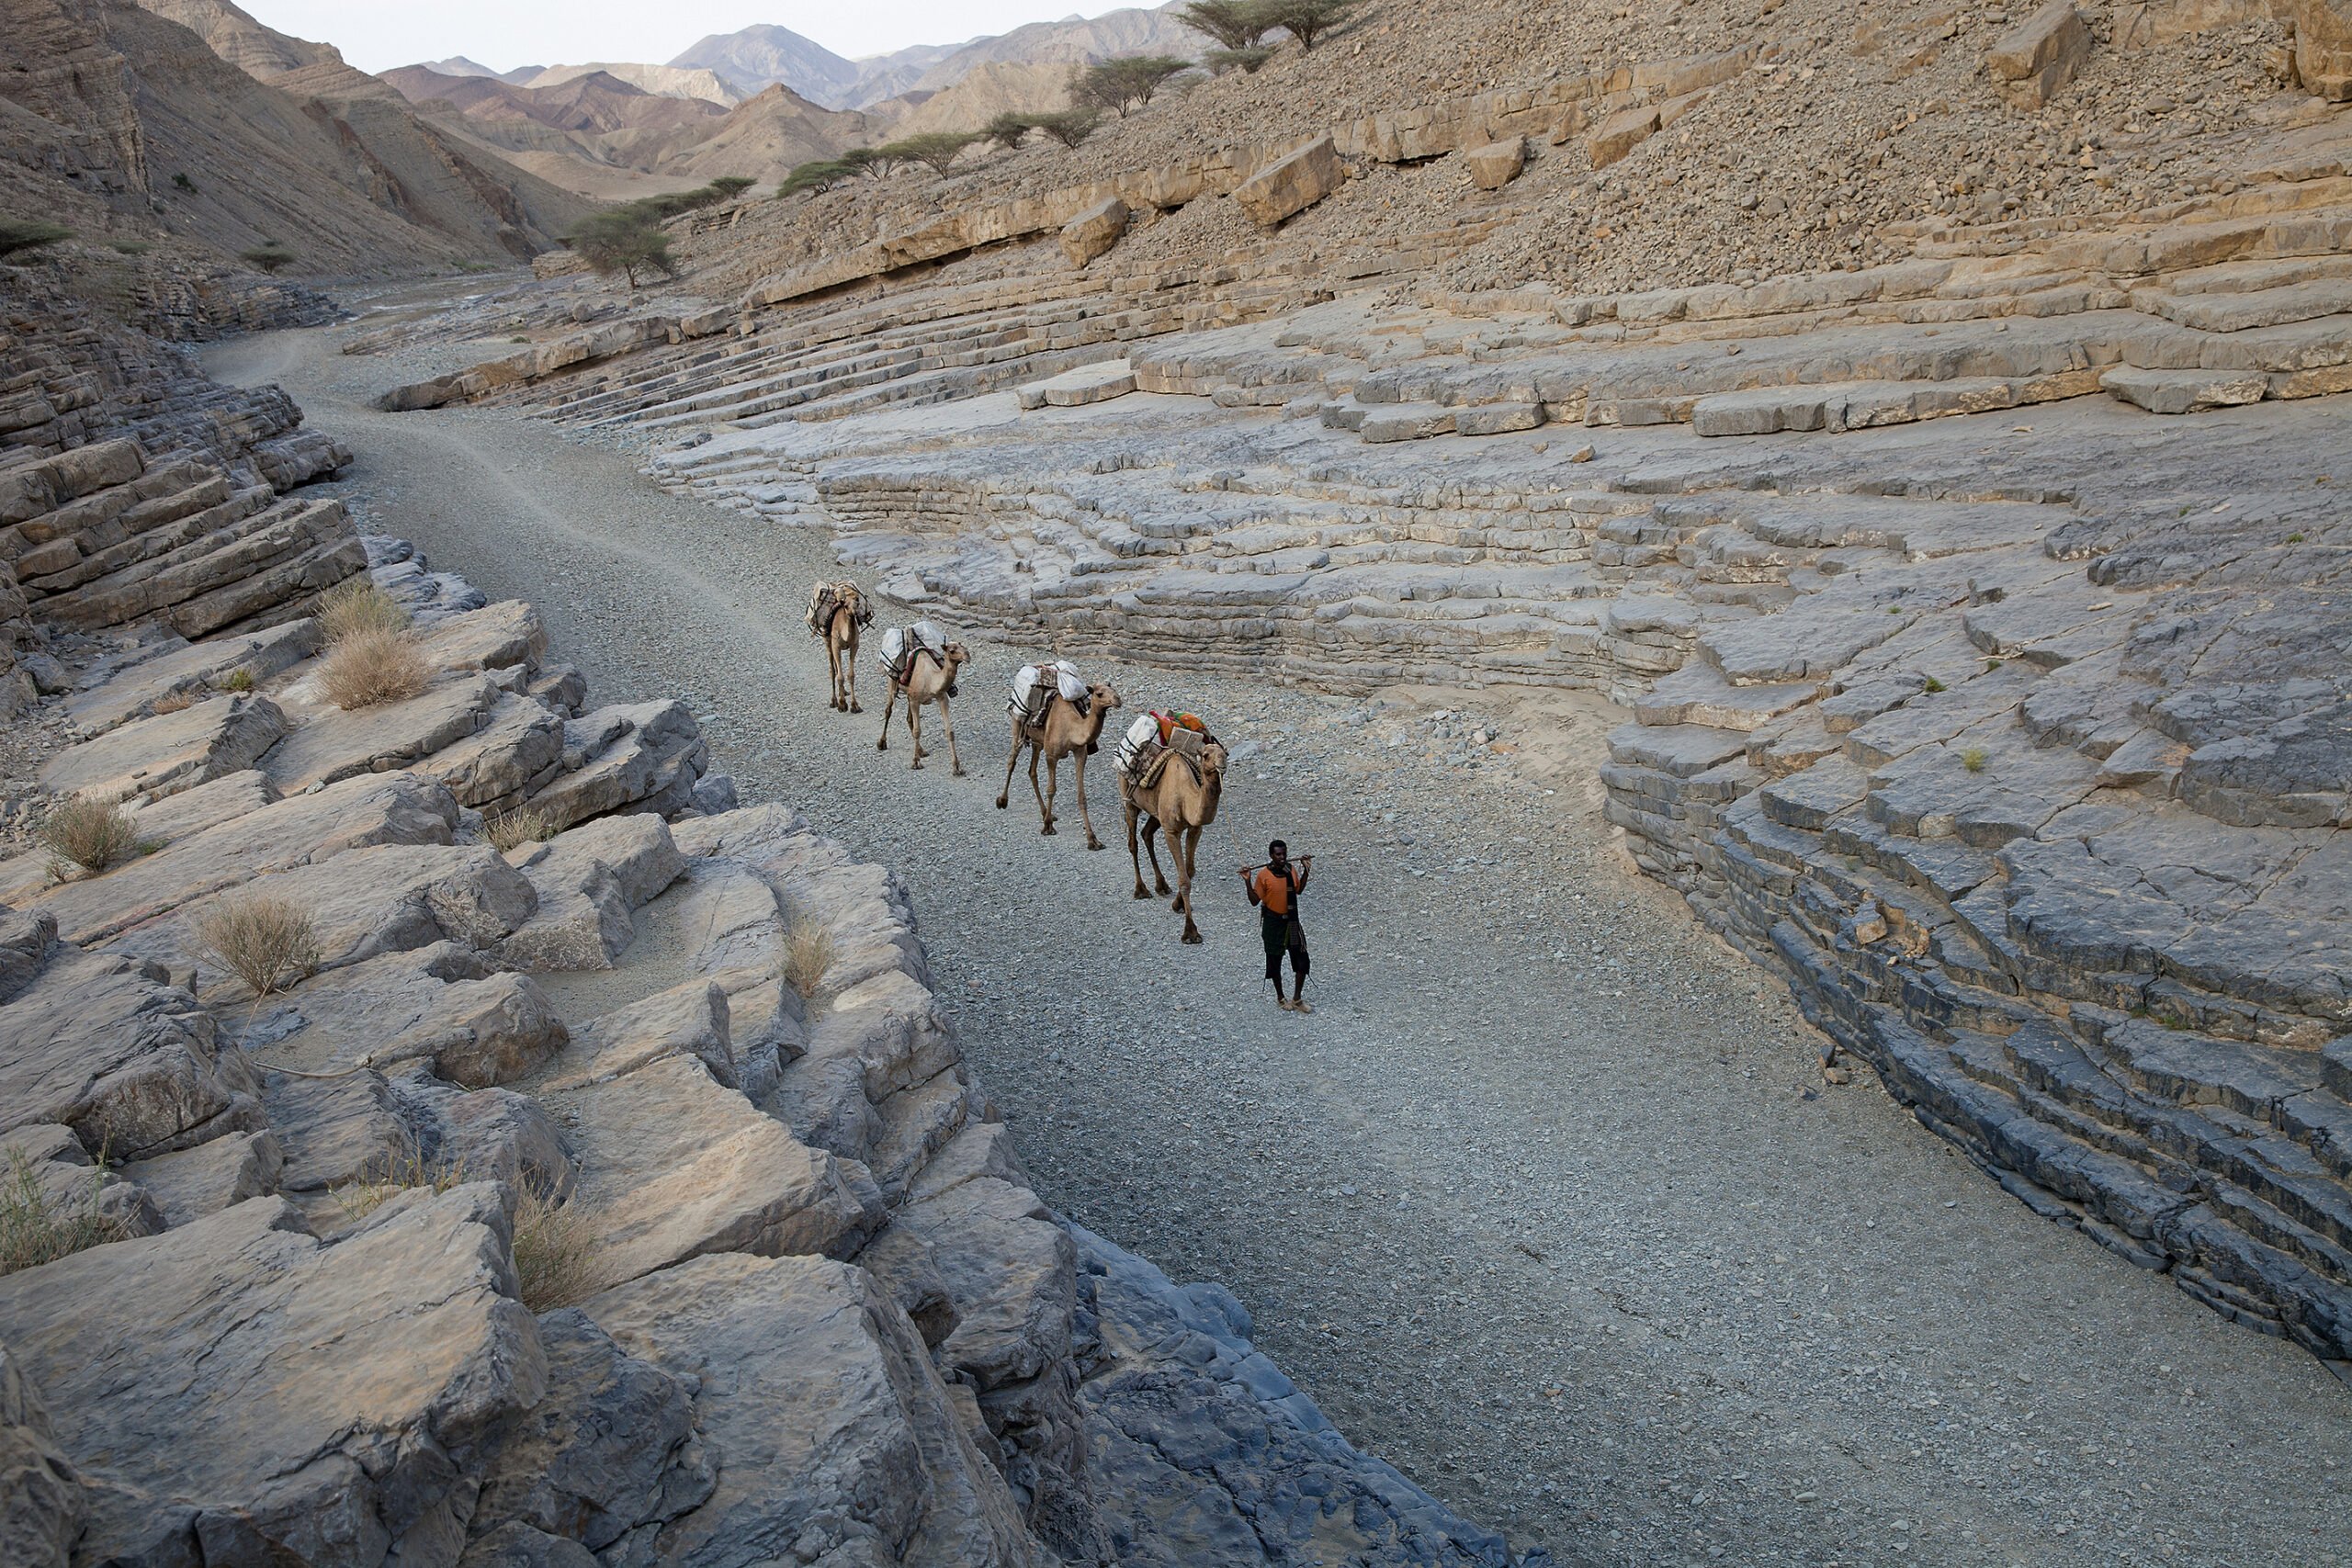 Four camels and a man walking through a narrow desert valley, photo by Luke Duggleby.